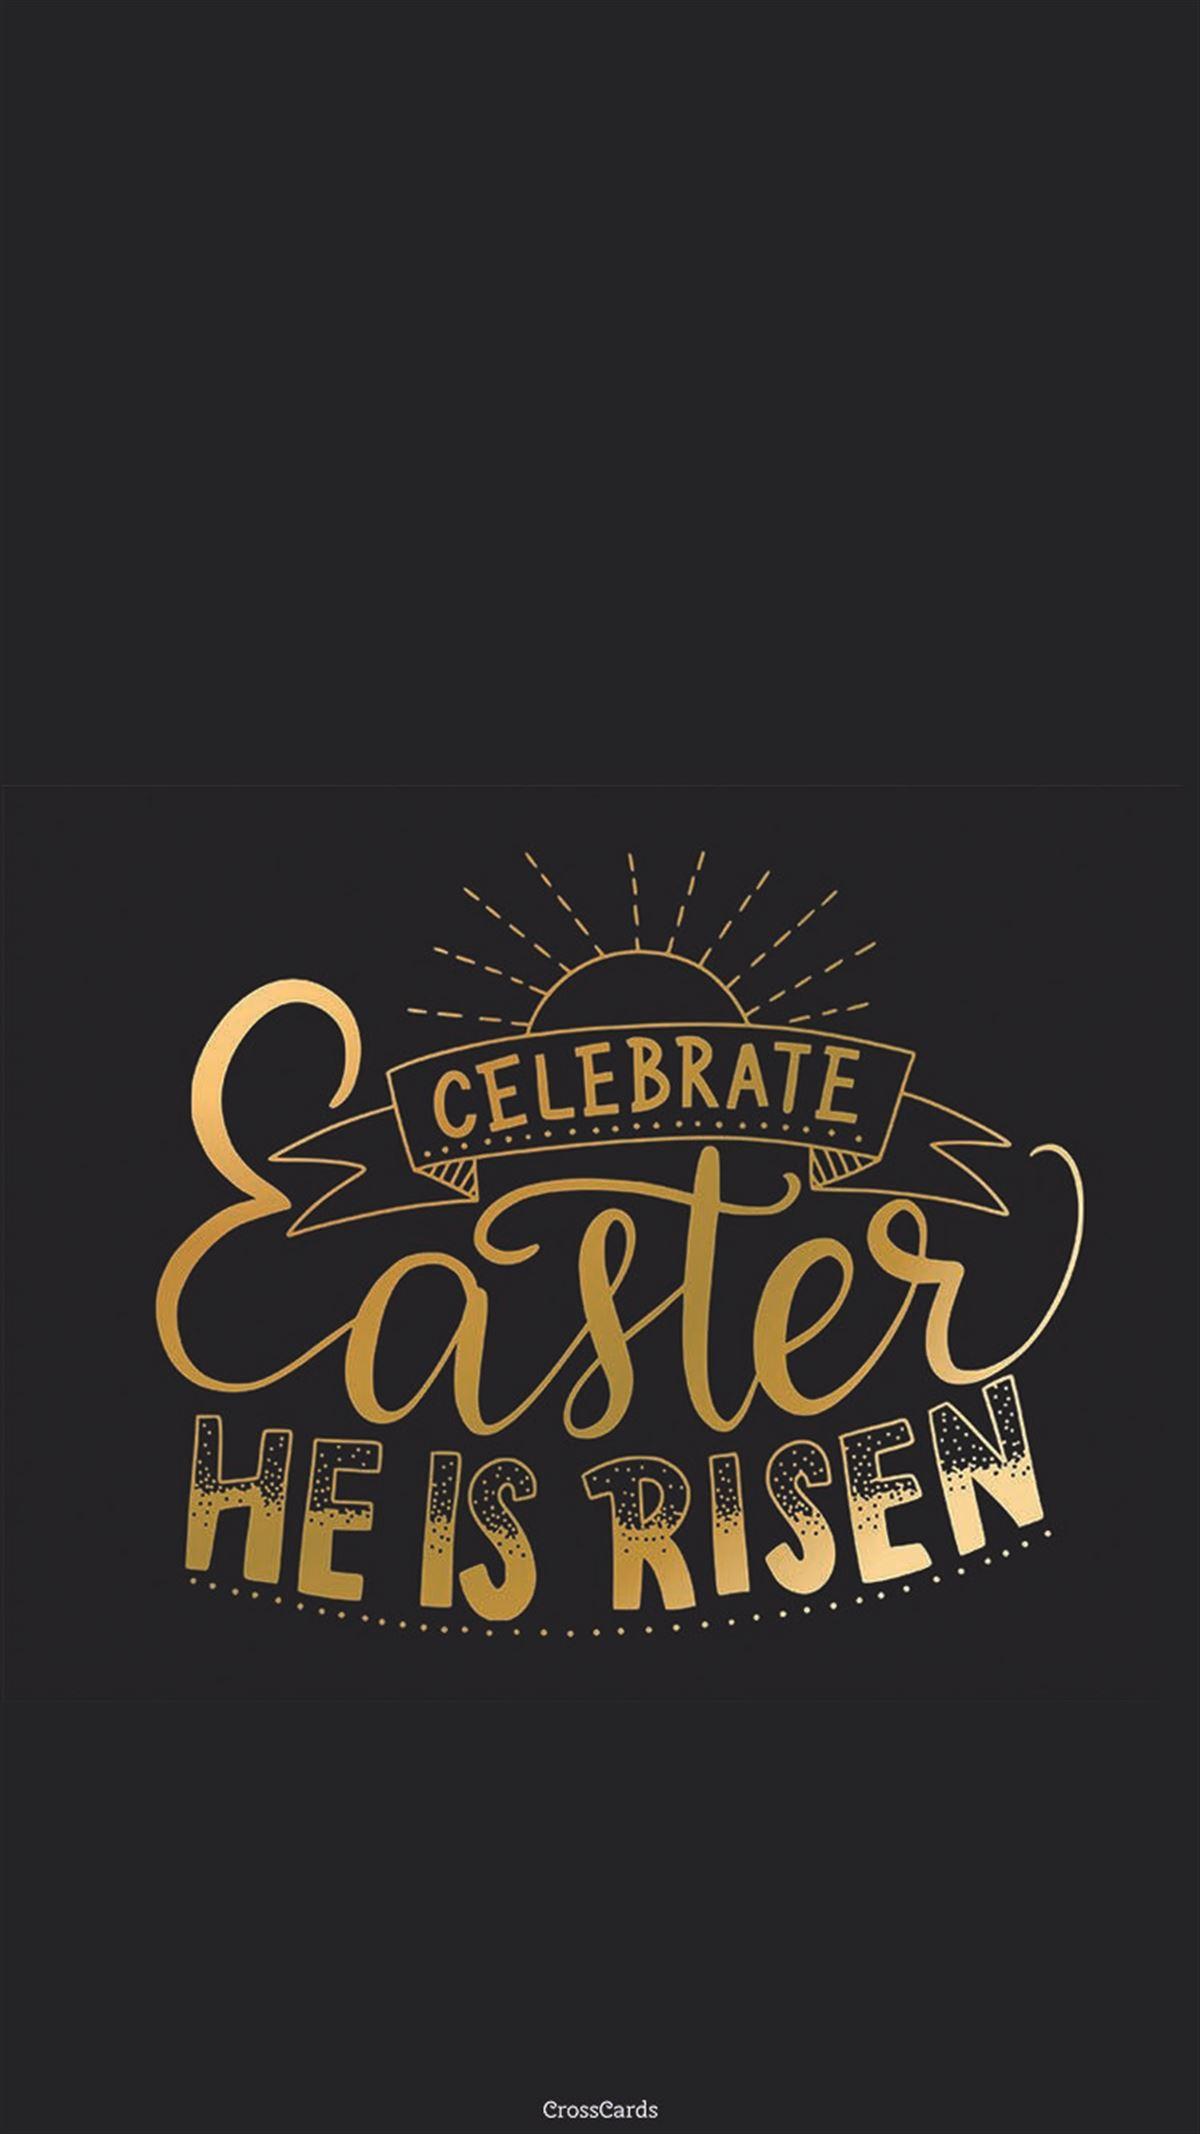 Celebrate Easter Wallpaper and Mobile Background